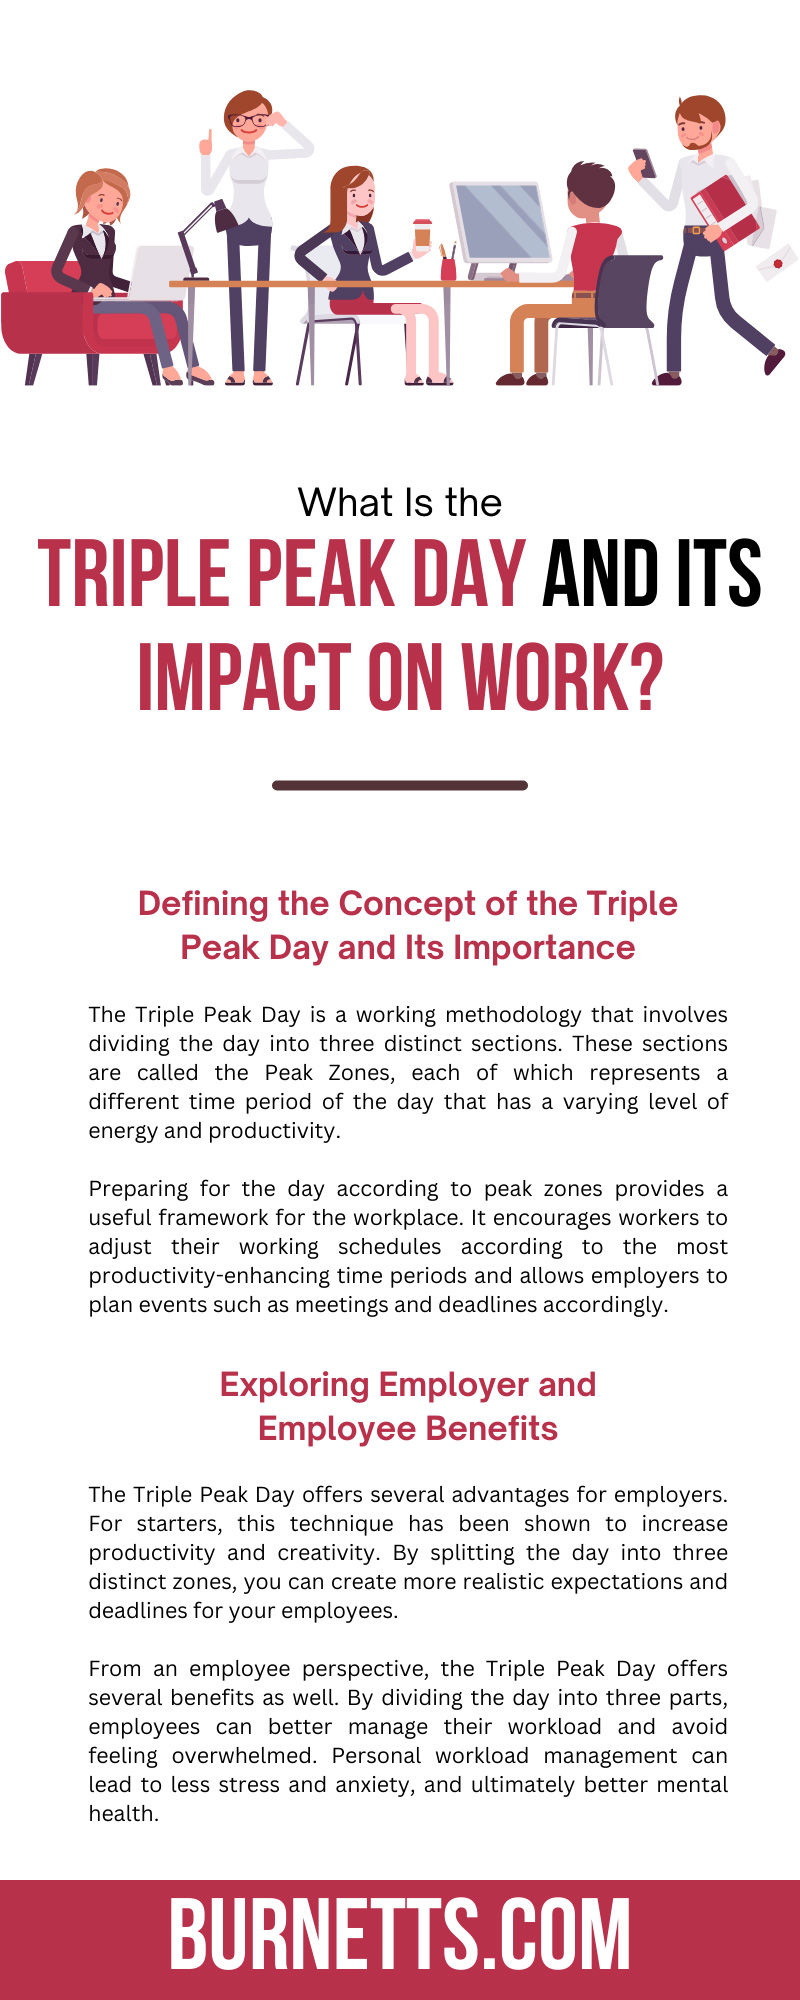 What Is the Triple Peak Day and Its Impact on Work?